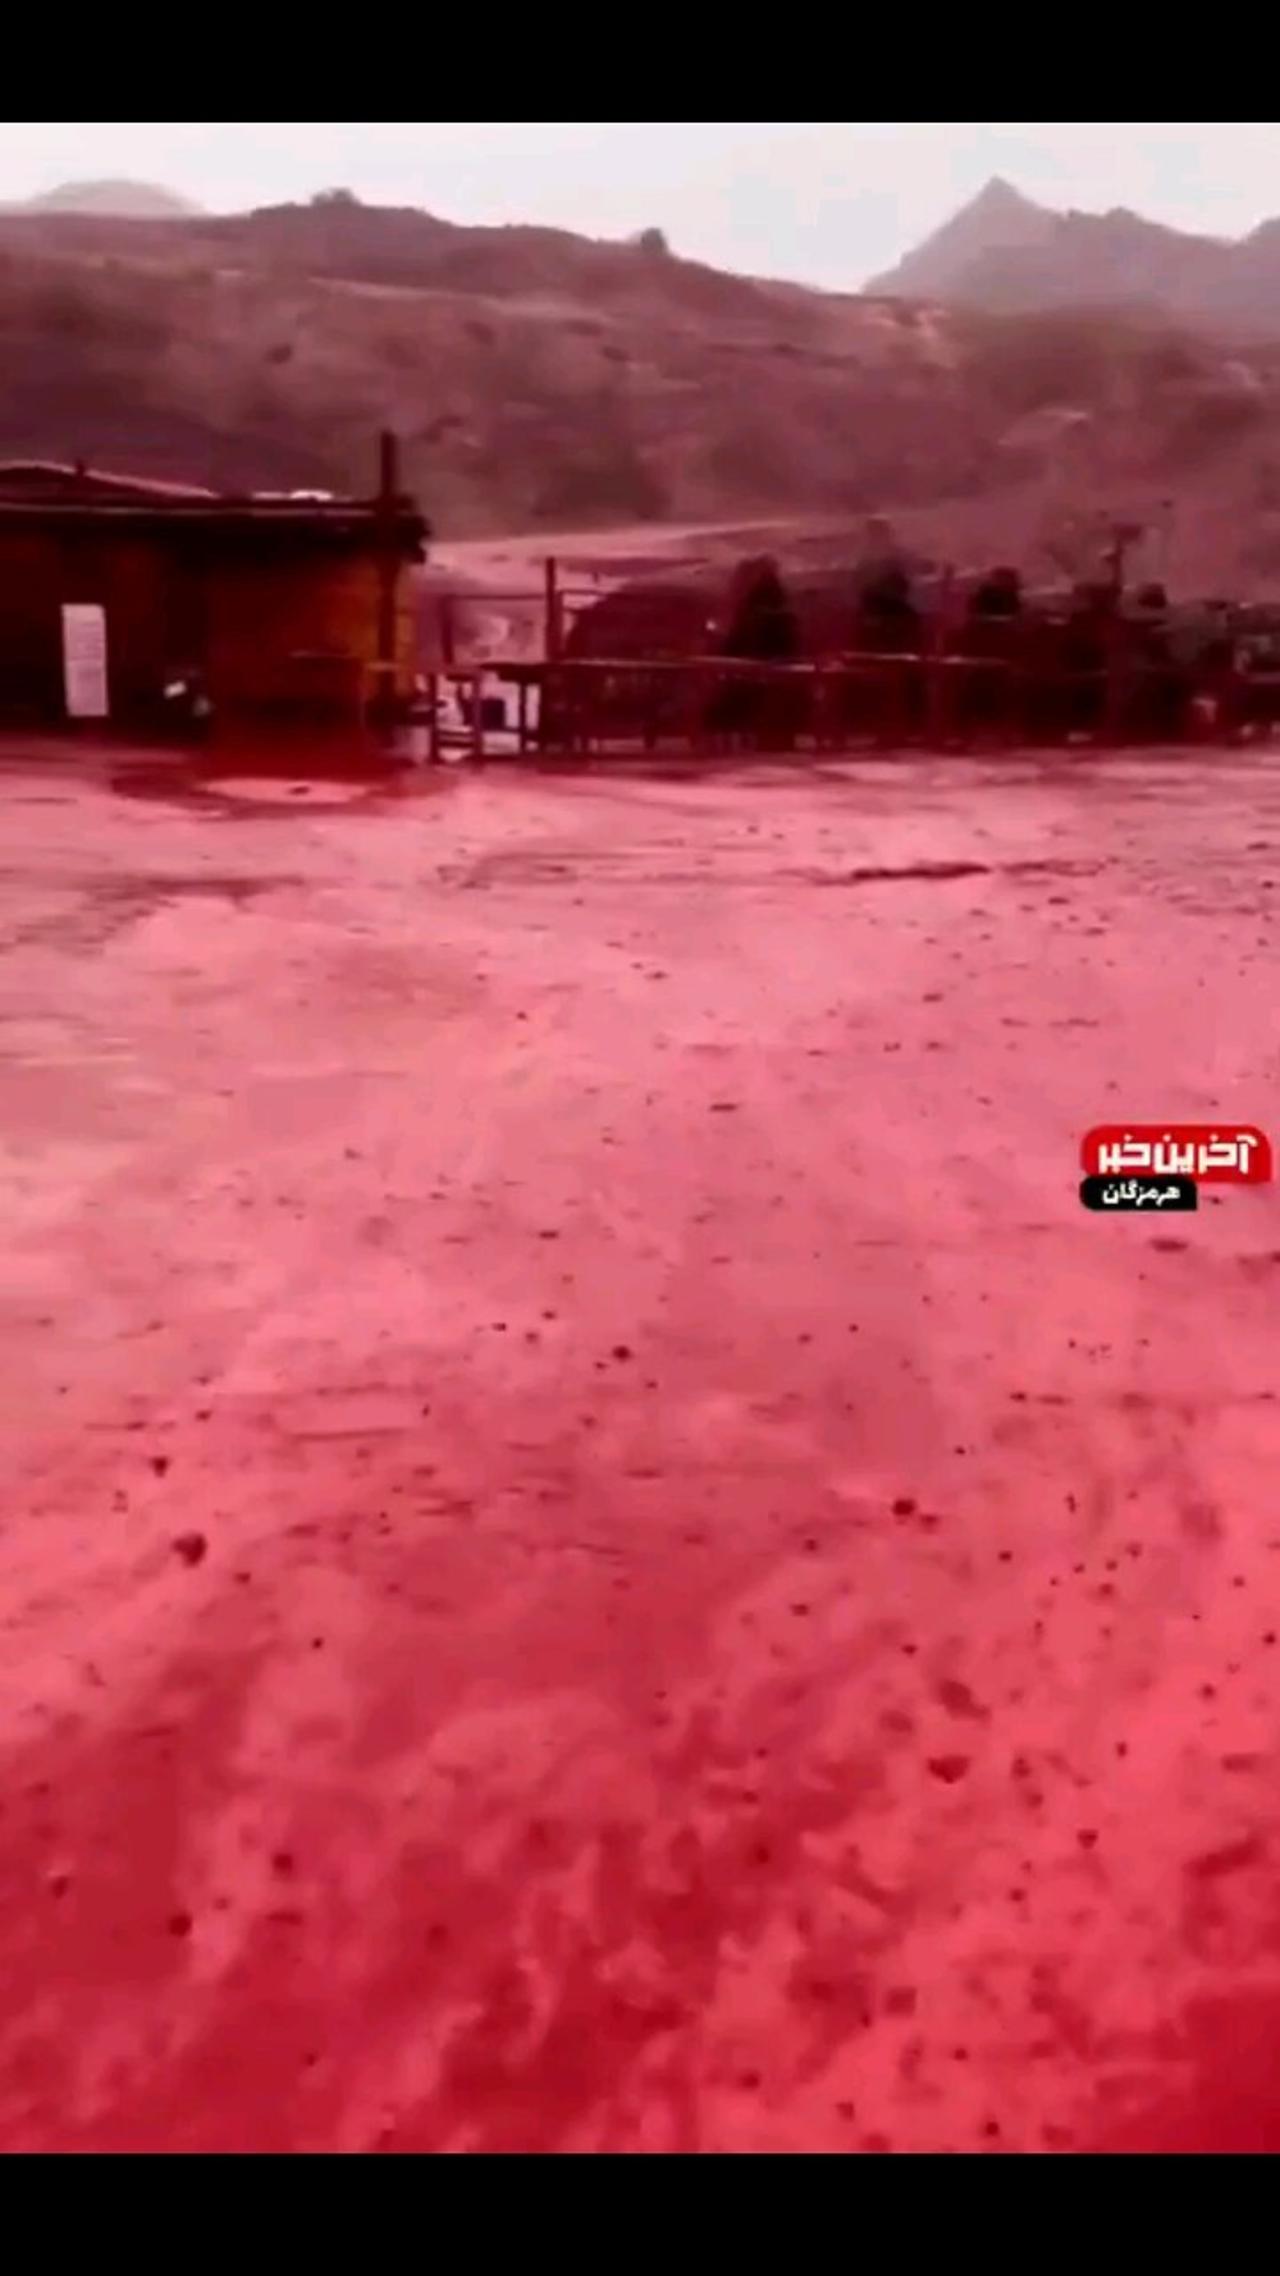 AFTER STORM, “RED FLOODS” ARE POURING OUT - - One News Page VIDEO